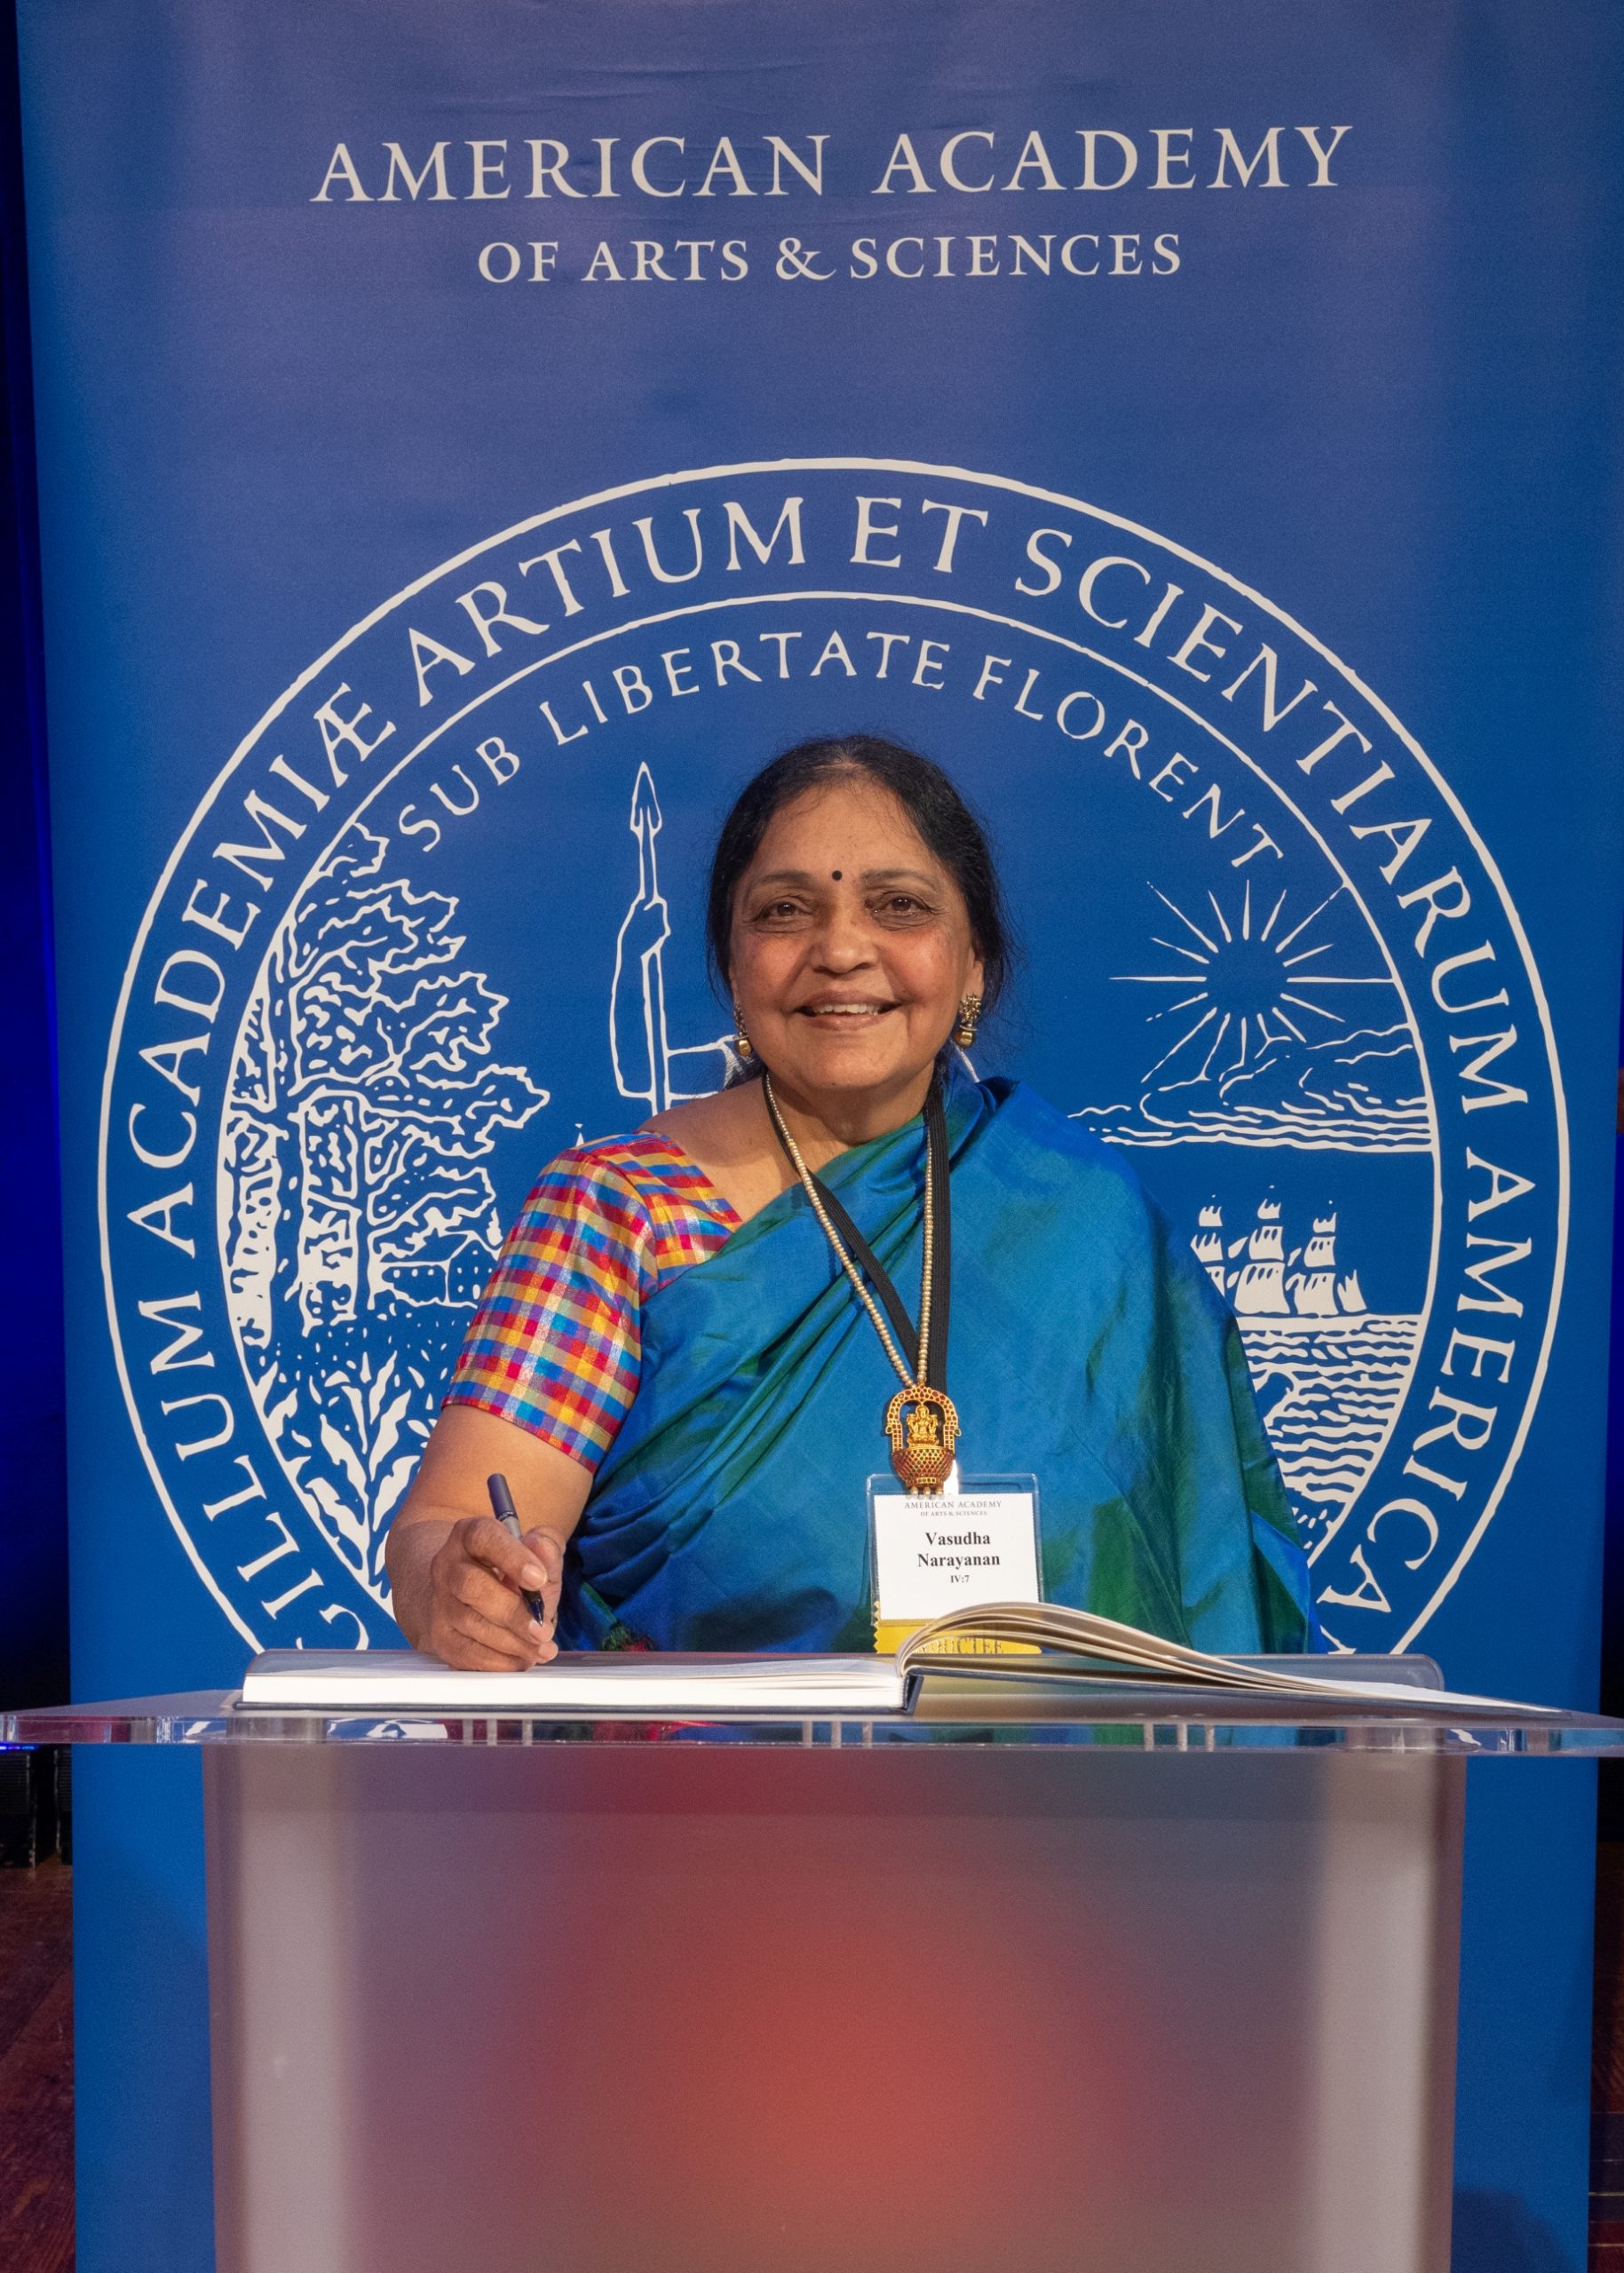 Dr. Vasudha Narayanan signing the register for the Academy that was founded in 1780 by John Adams and John Hancock